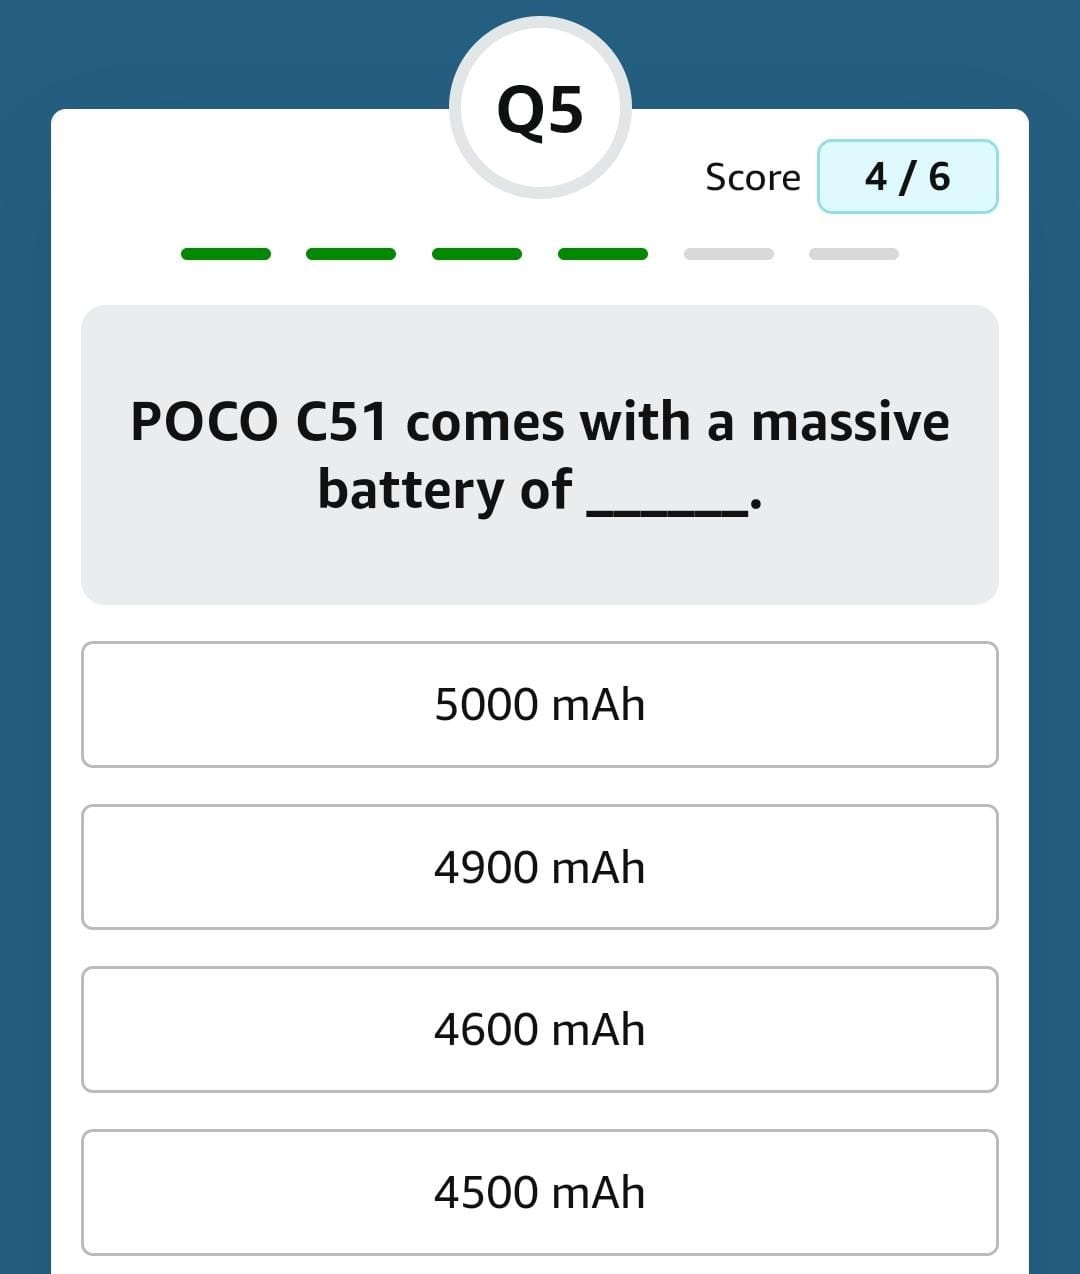 POCO C51 comes with a massive battery of